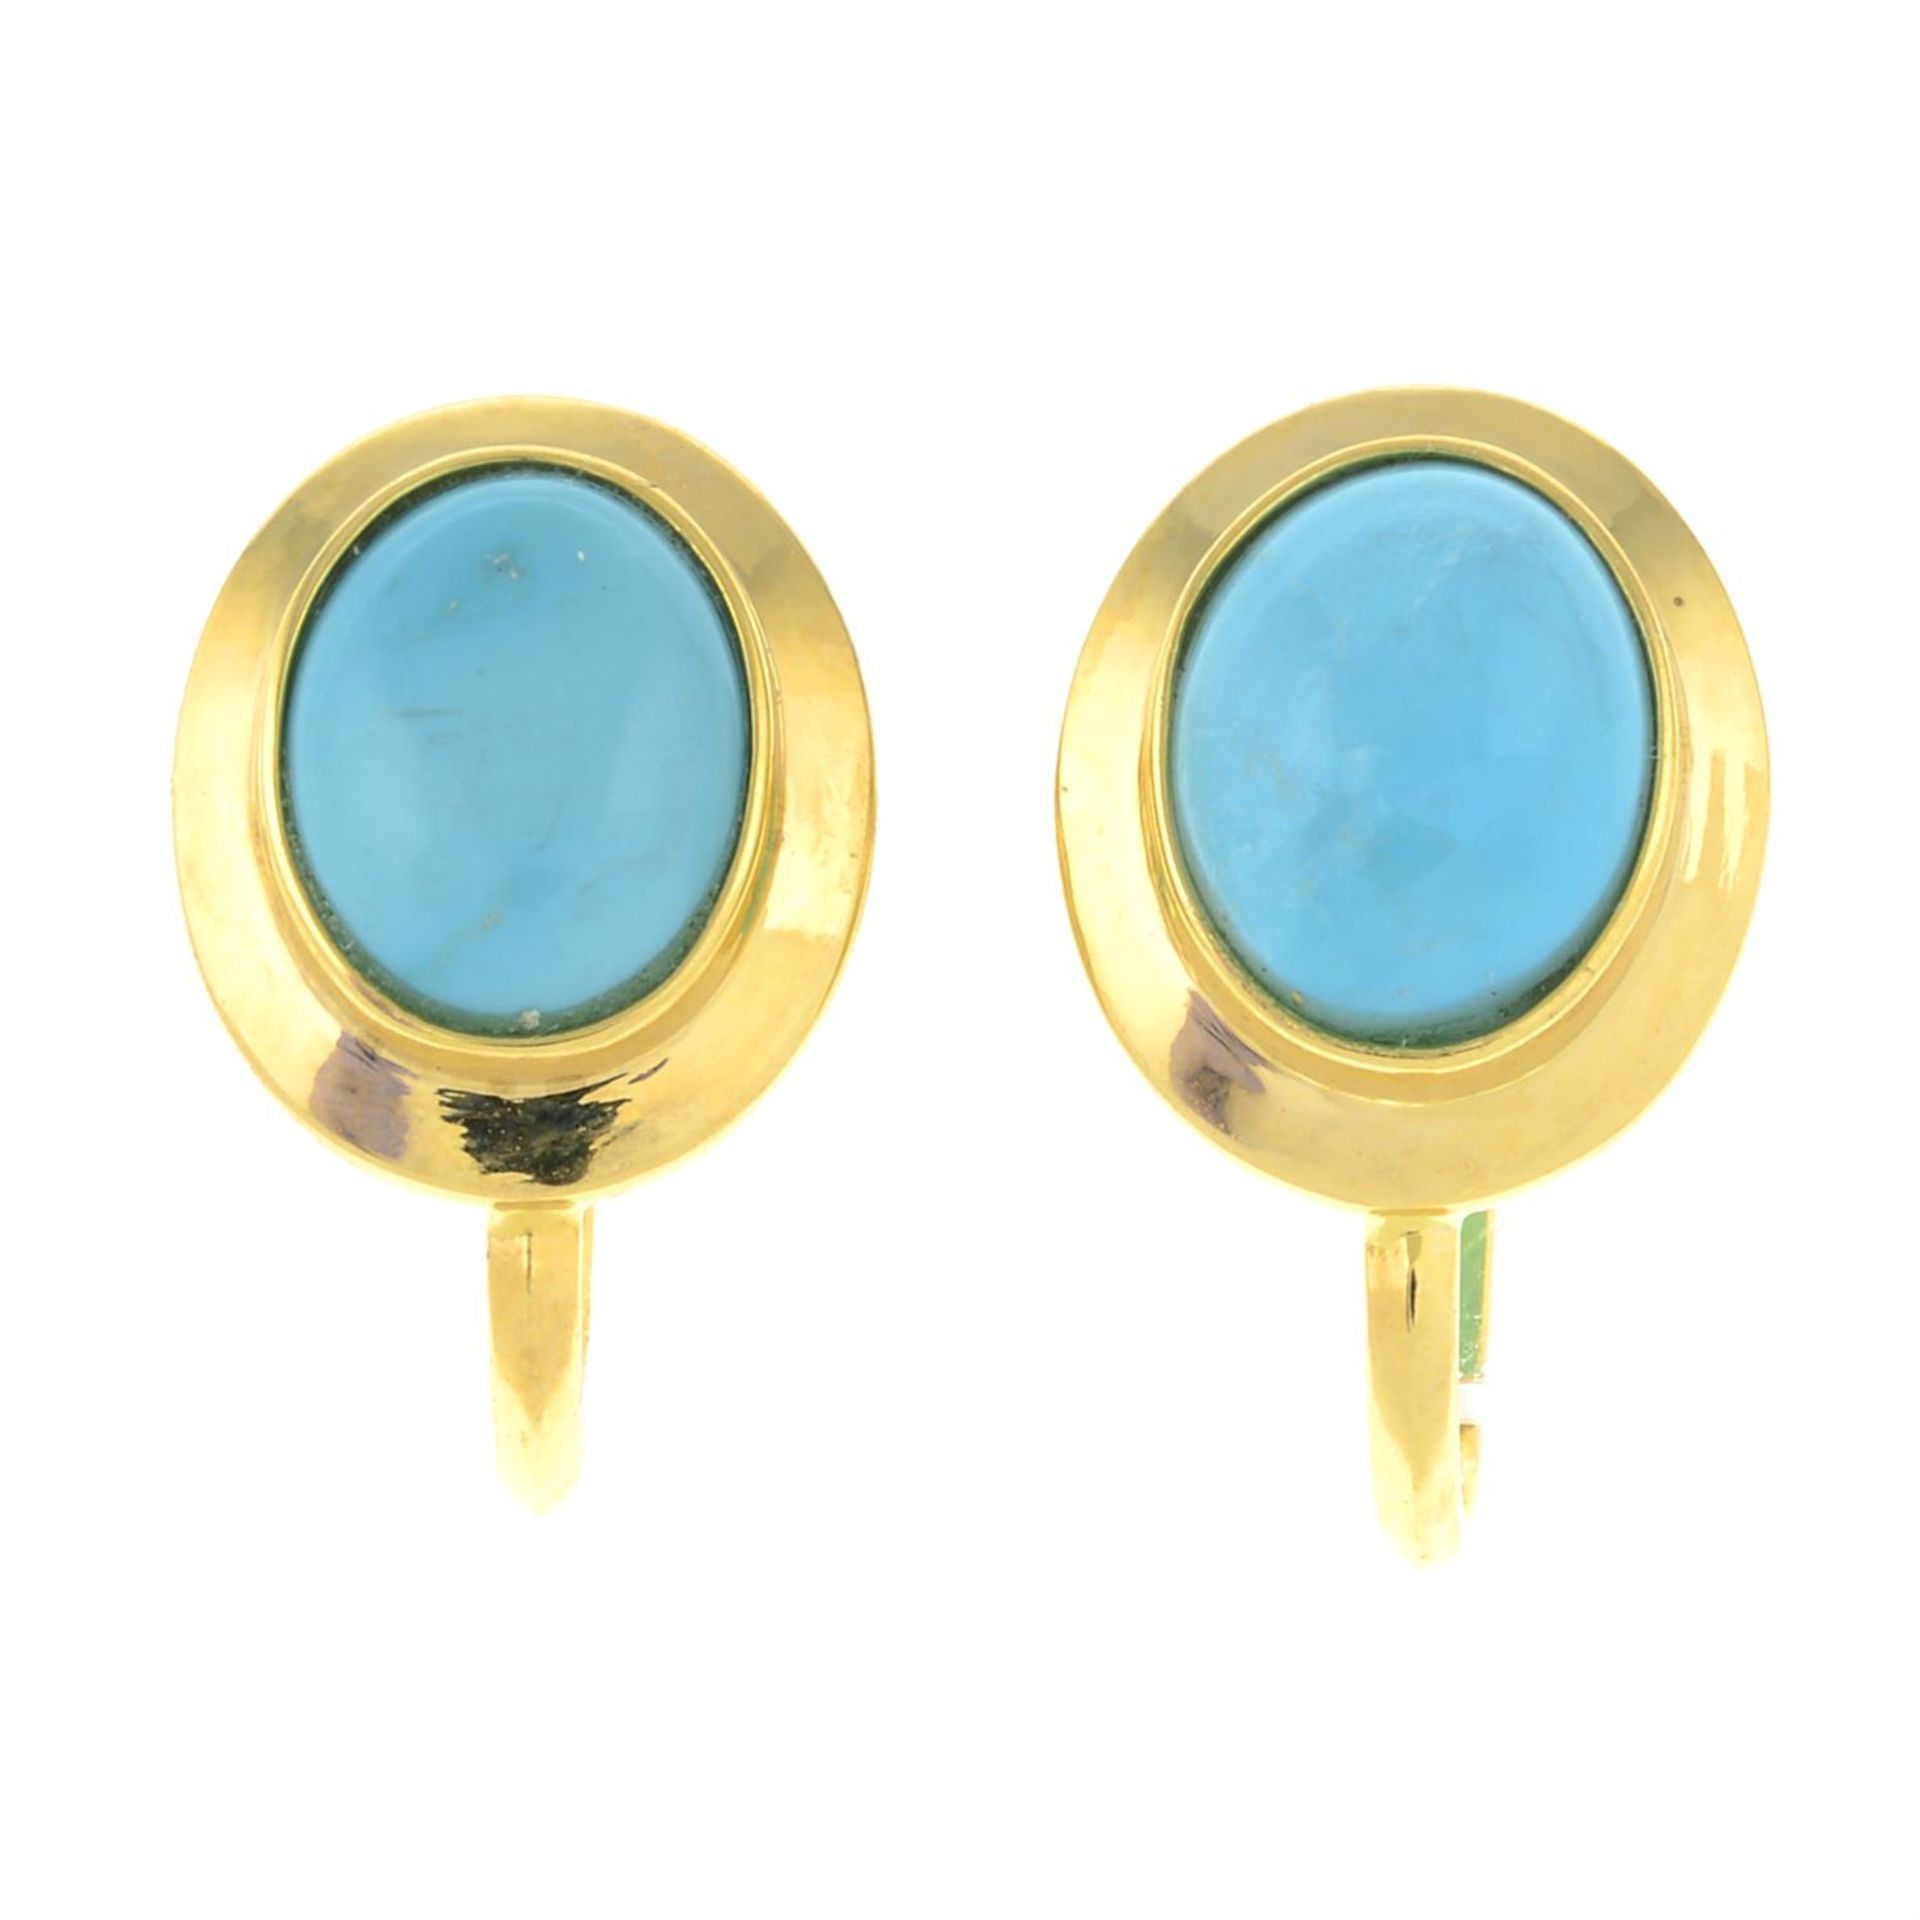 A pair of turquoise screw-back earrings.